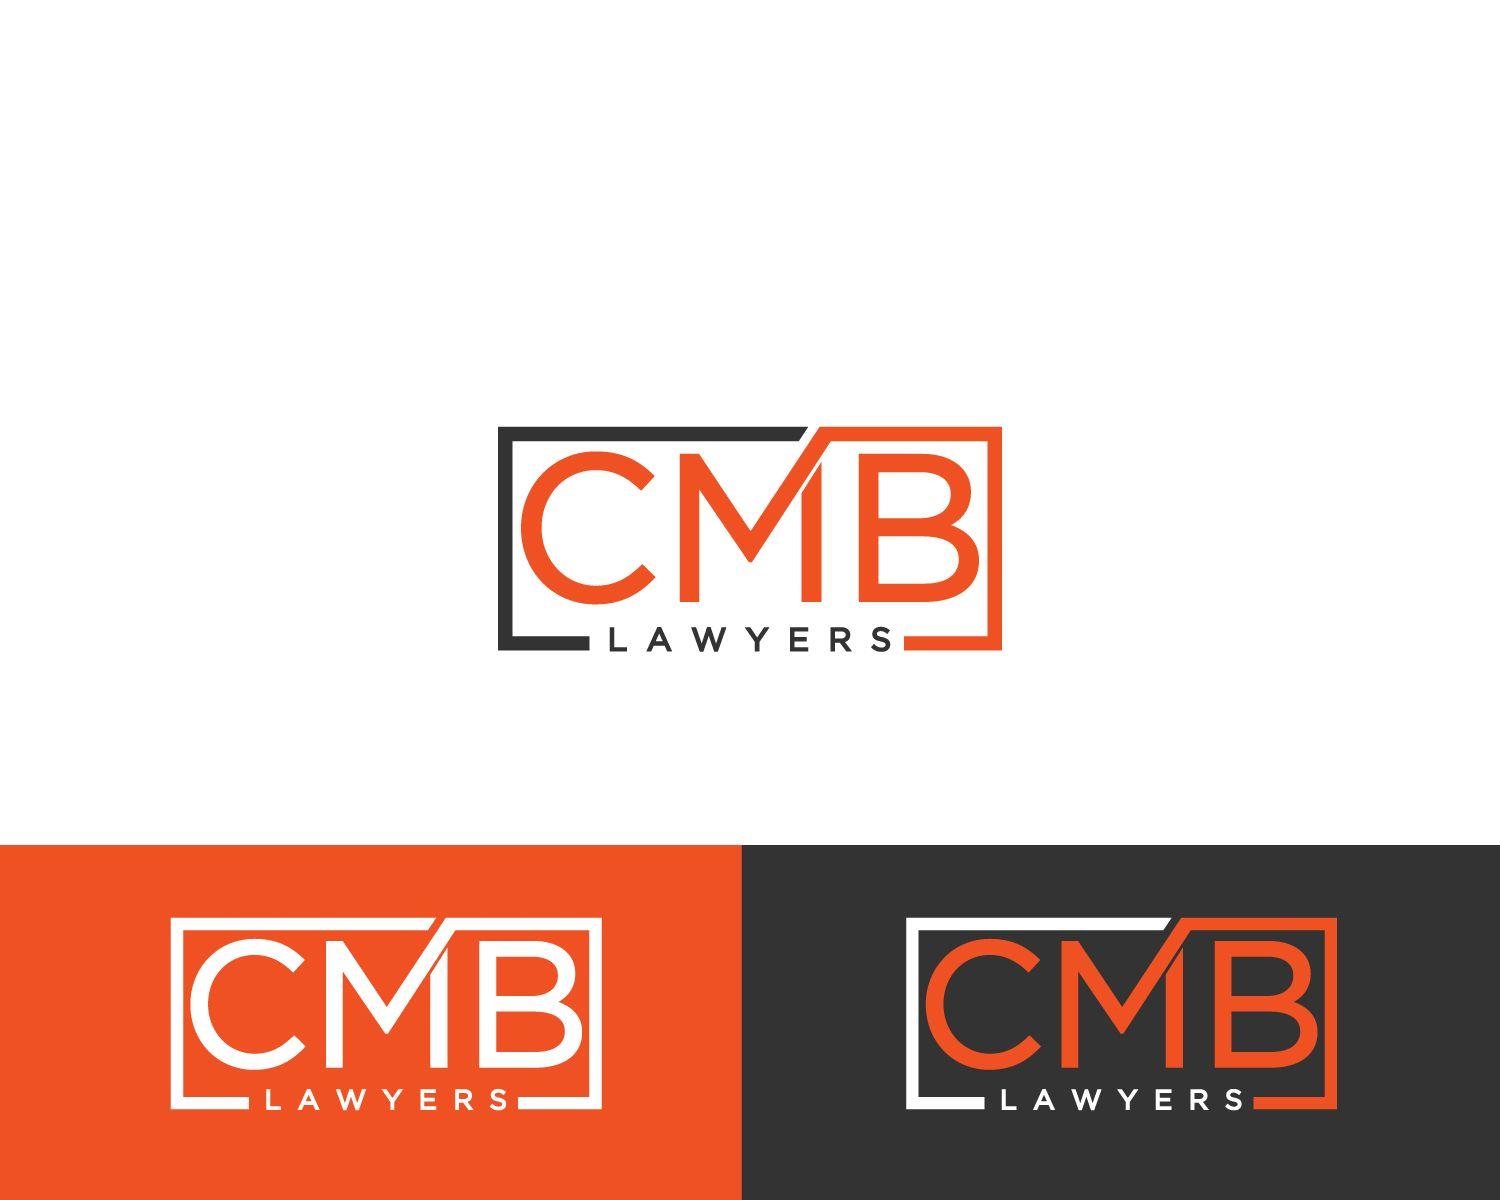 CMB Logo - Professional, Upmarket, Law Firm Logo Design for CMB Lawyers by Atec ...